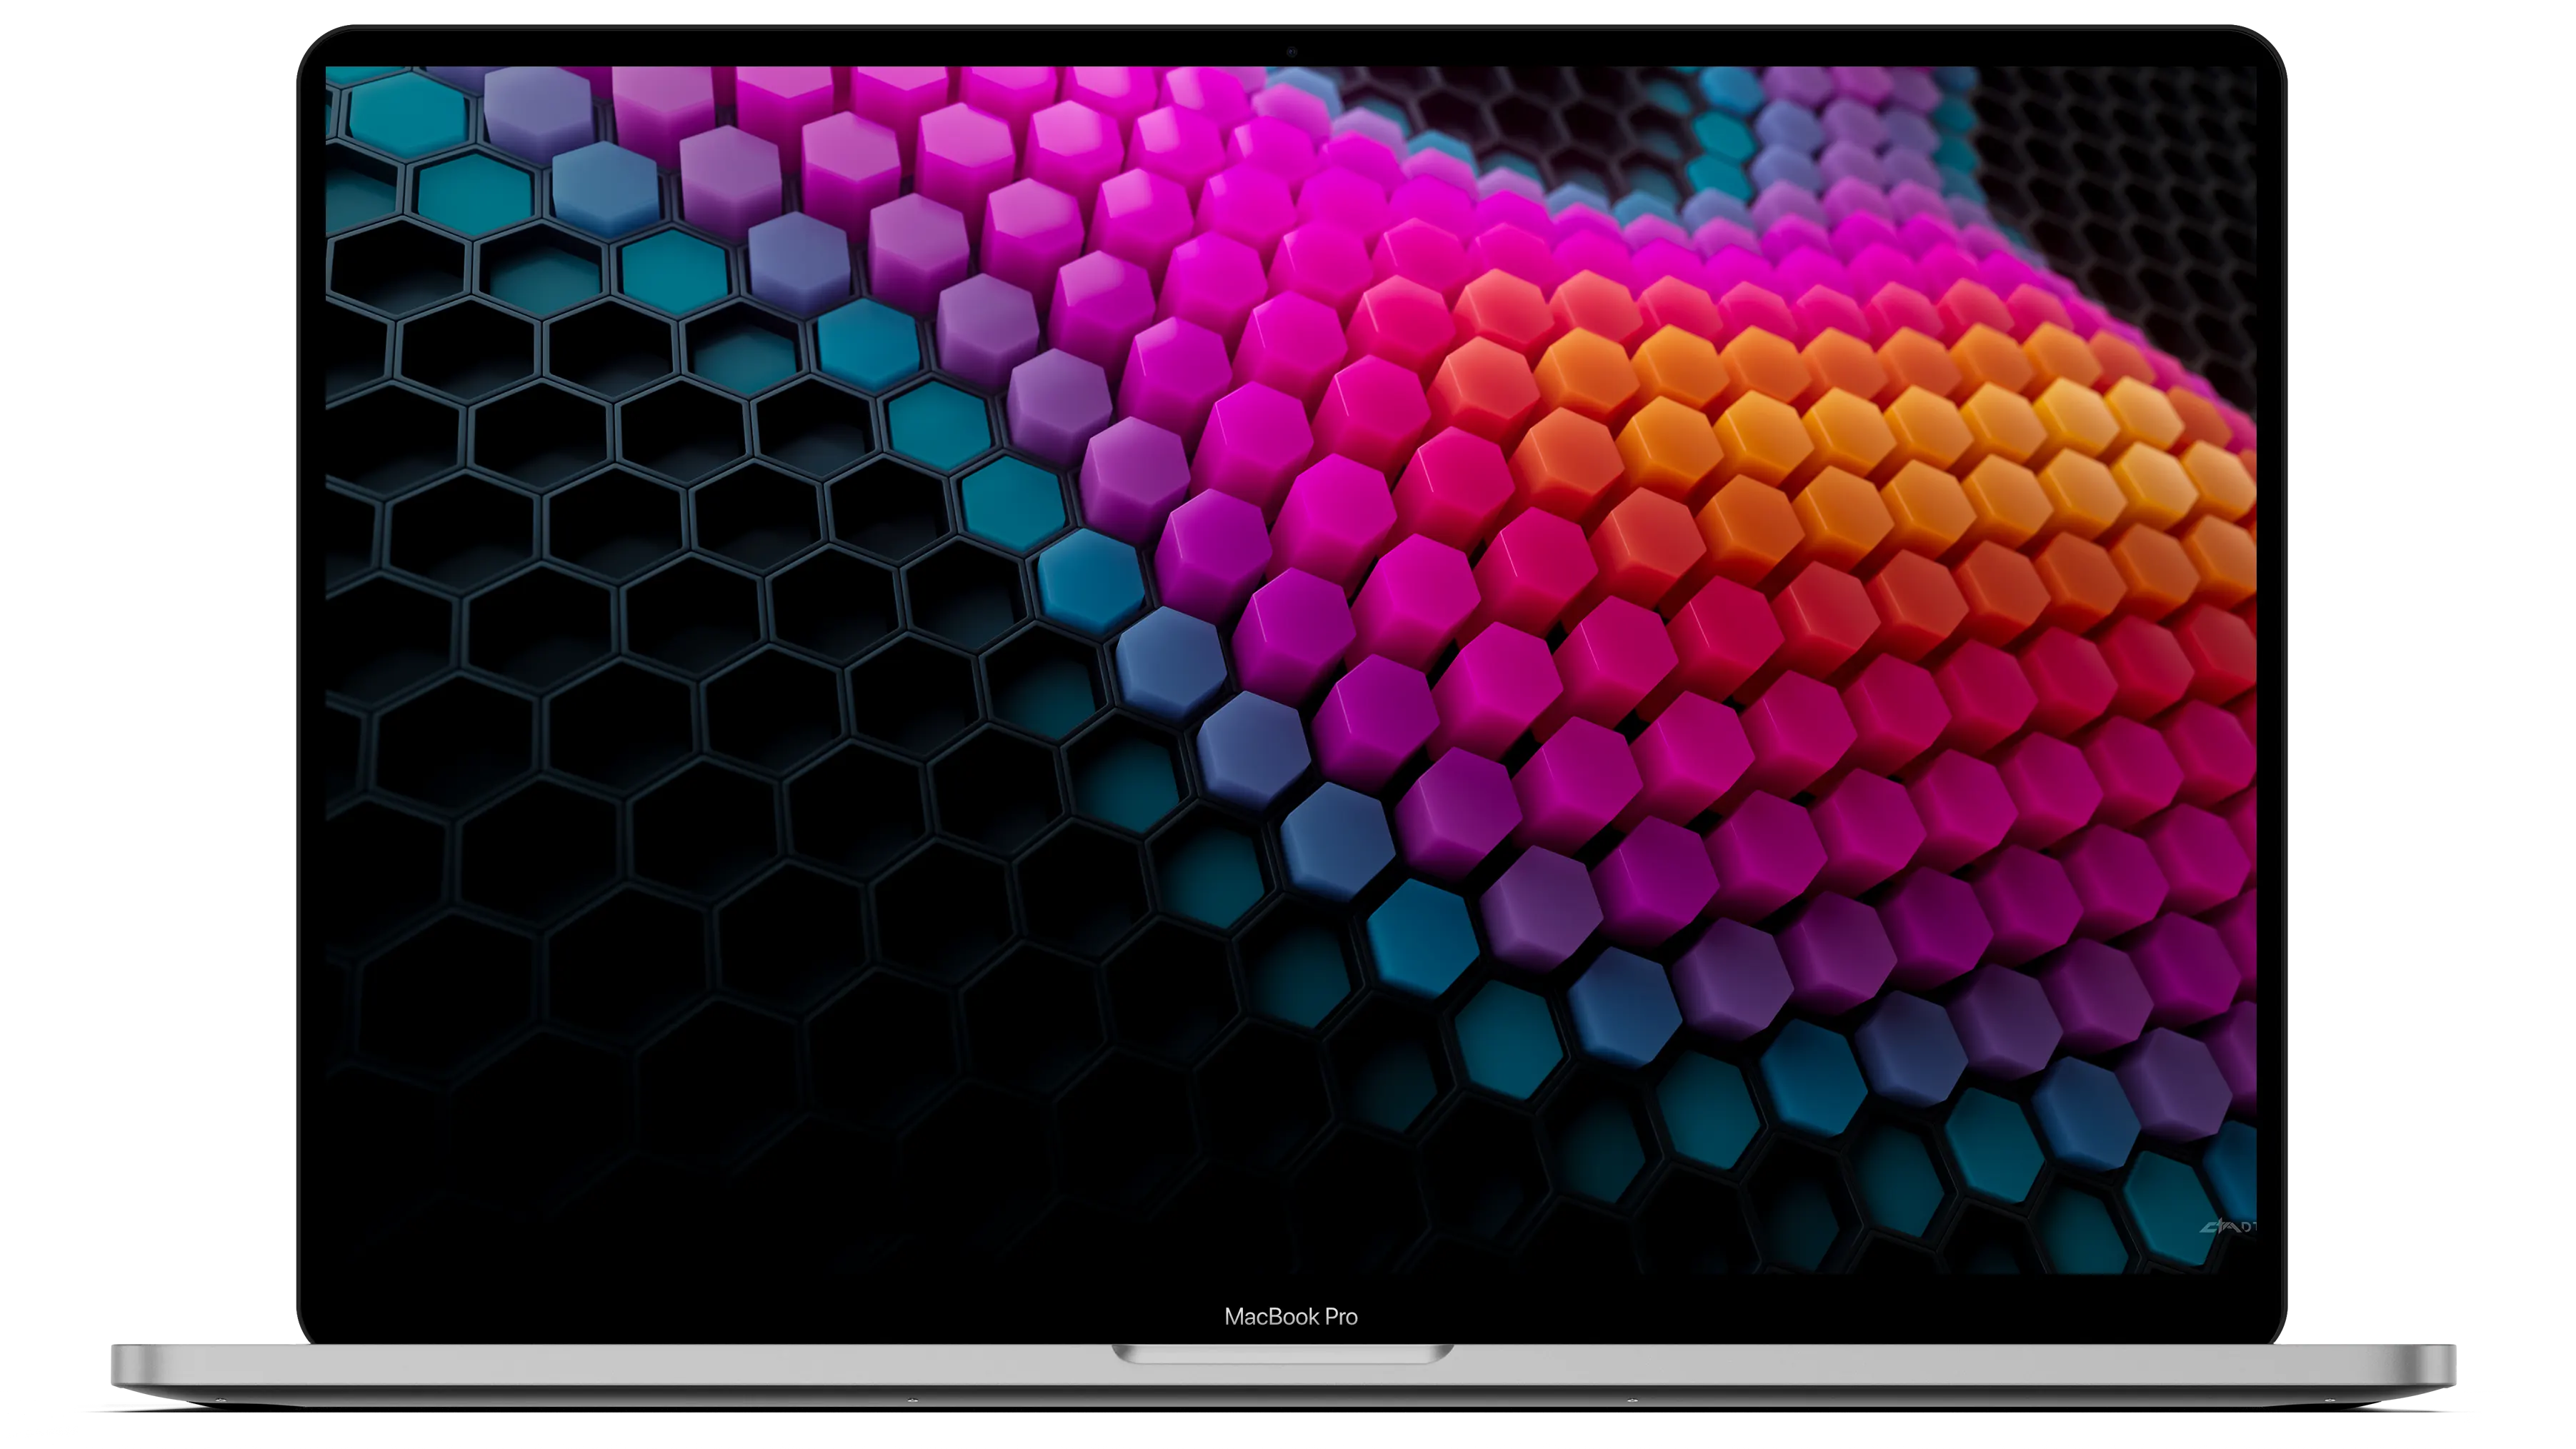 MACBOOK MOCKUP WITH A BACKGROUND WALLPAPER 4K FOR PC - HEXAGON PATTERN